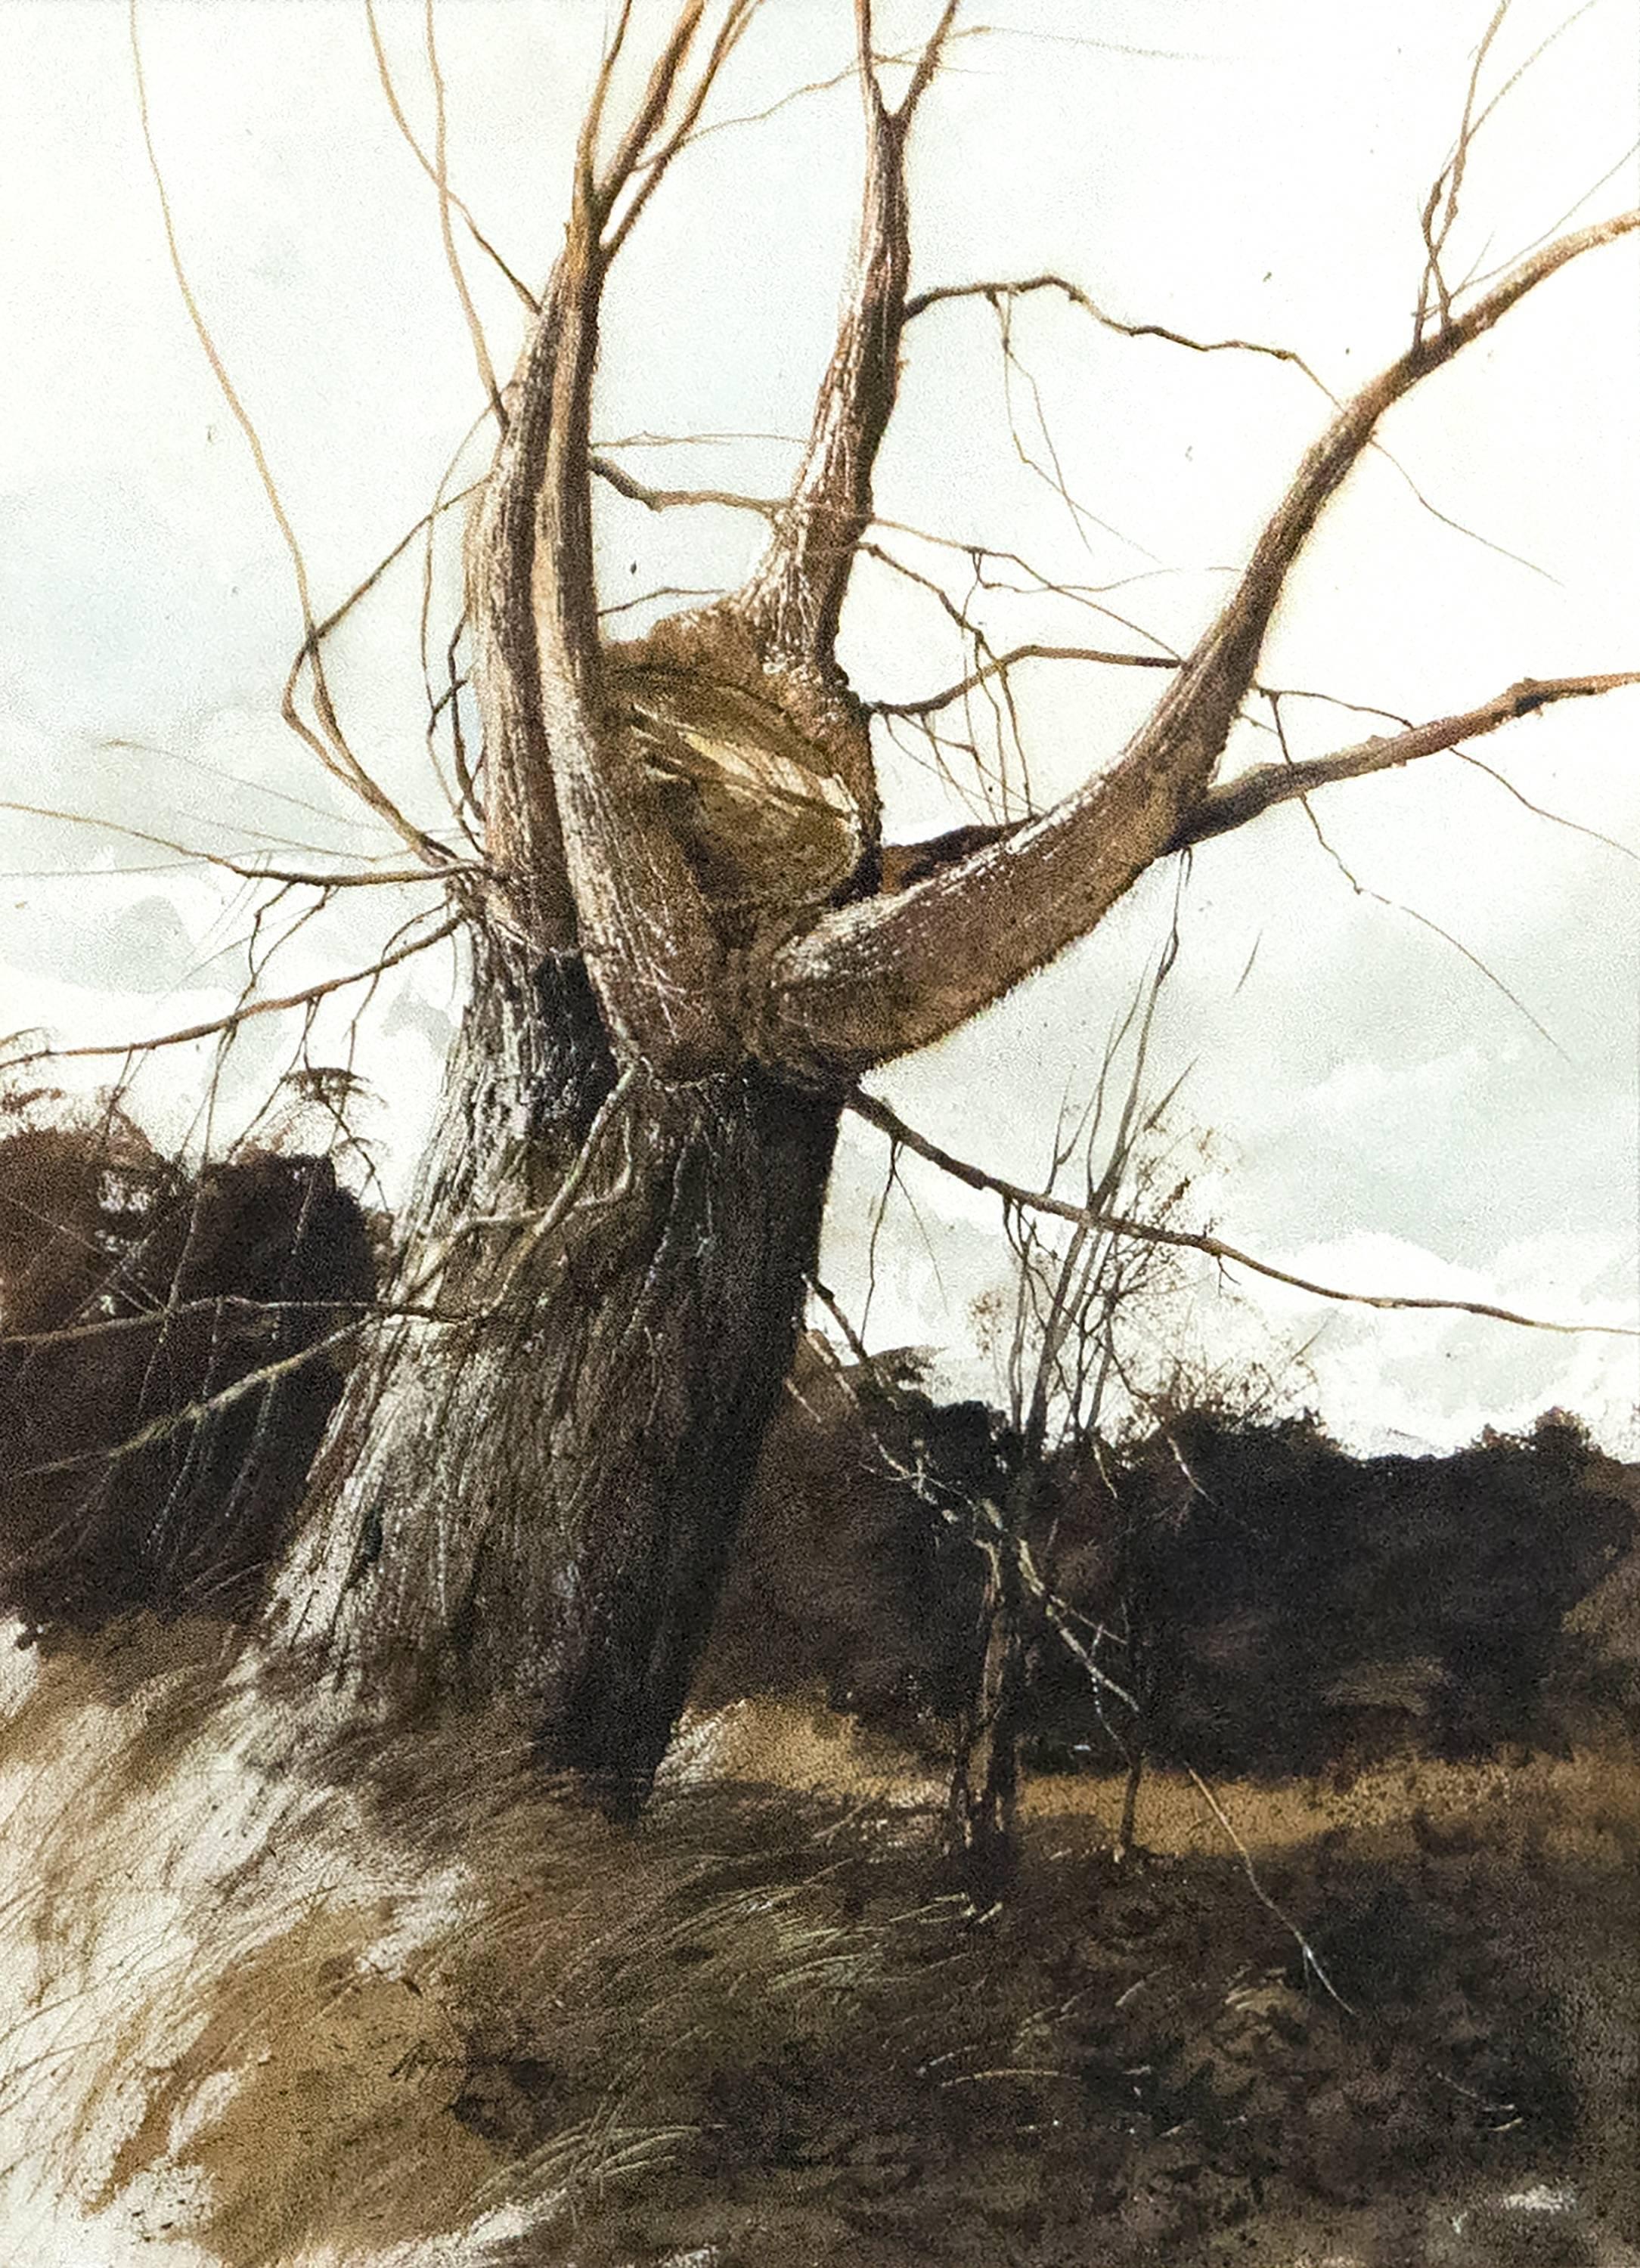 Gregory Sumida Landscape Art - Approaching Storm, New Branches